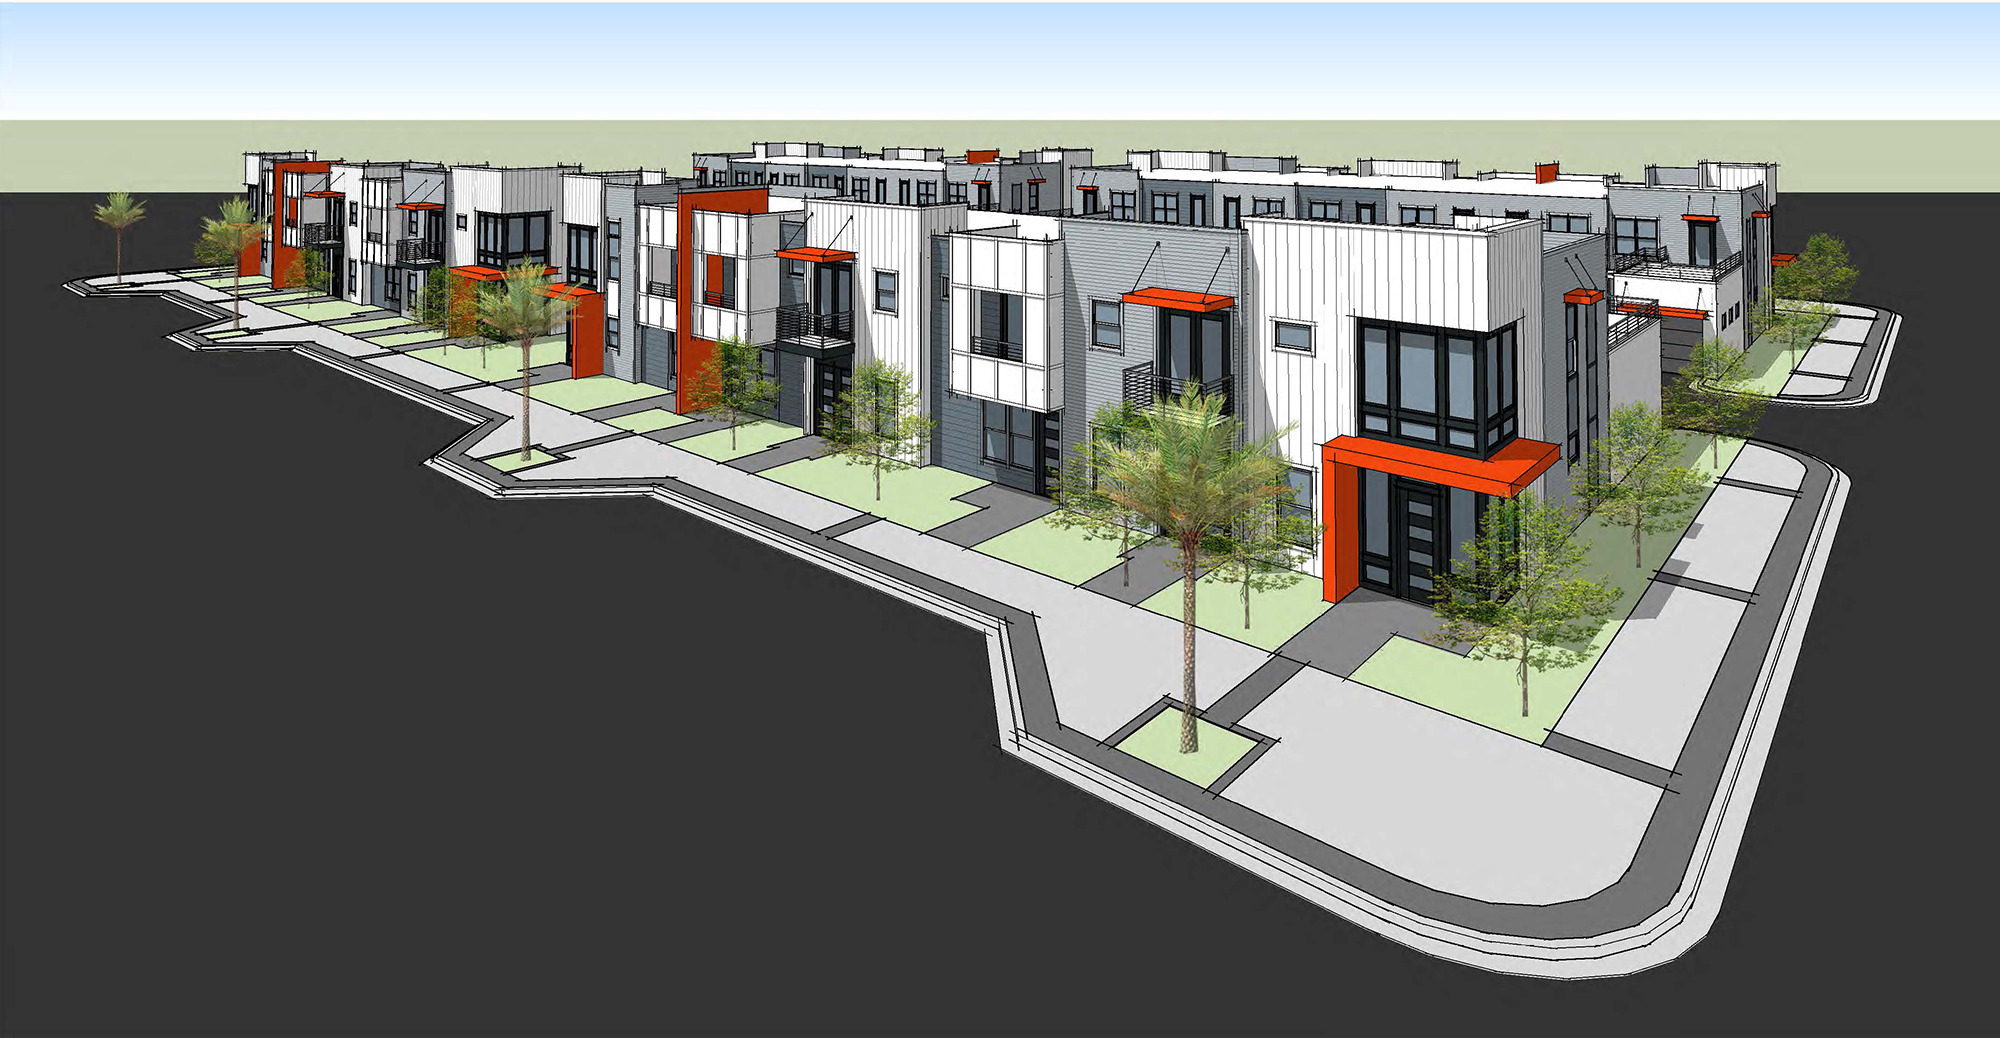 Vestcor said the townhomes would sell for about $250,000.